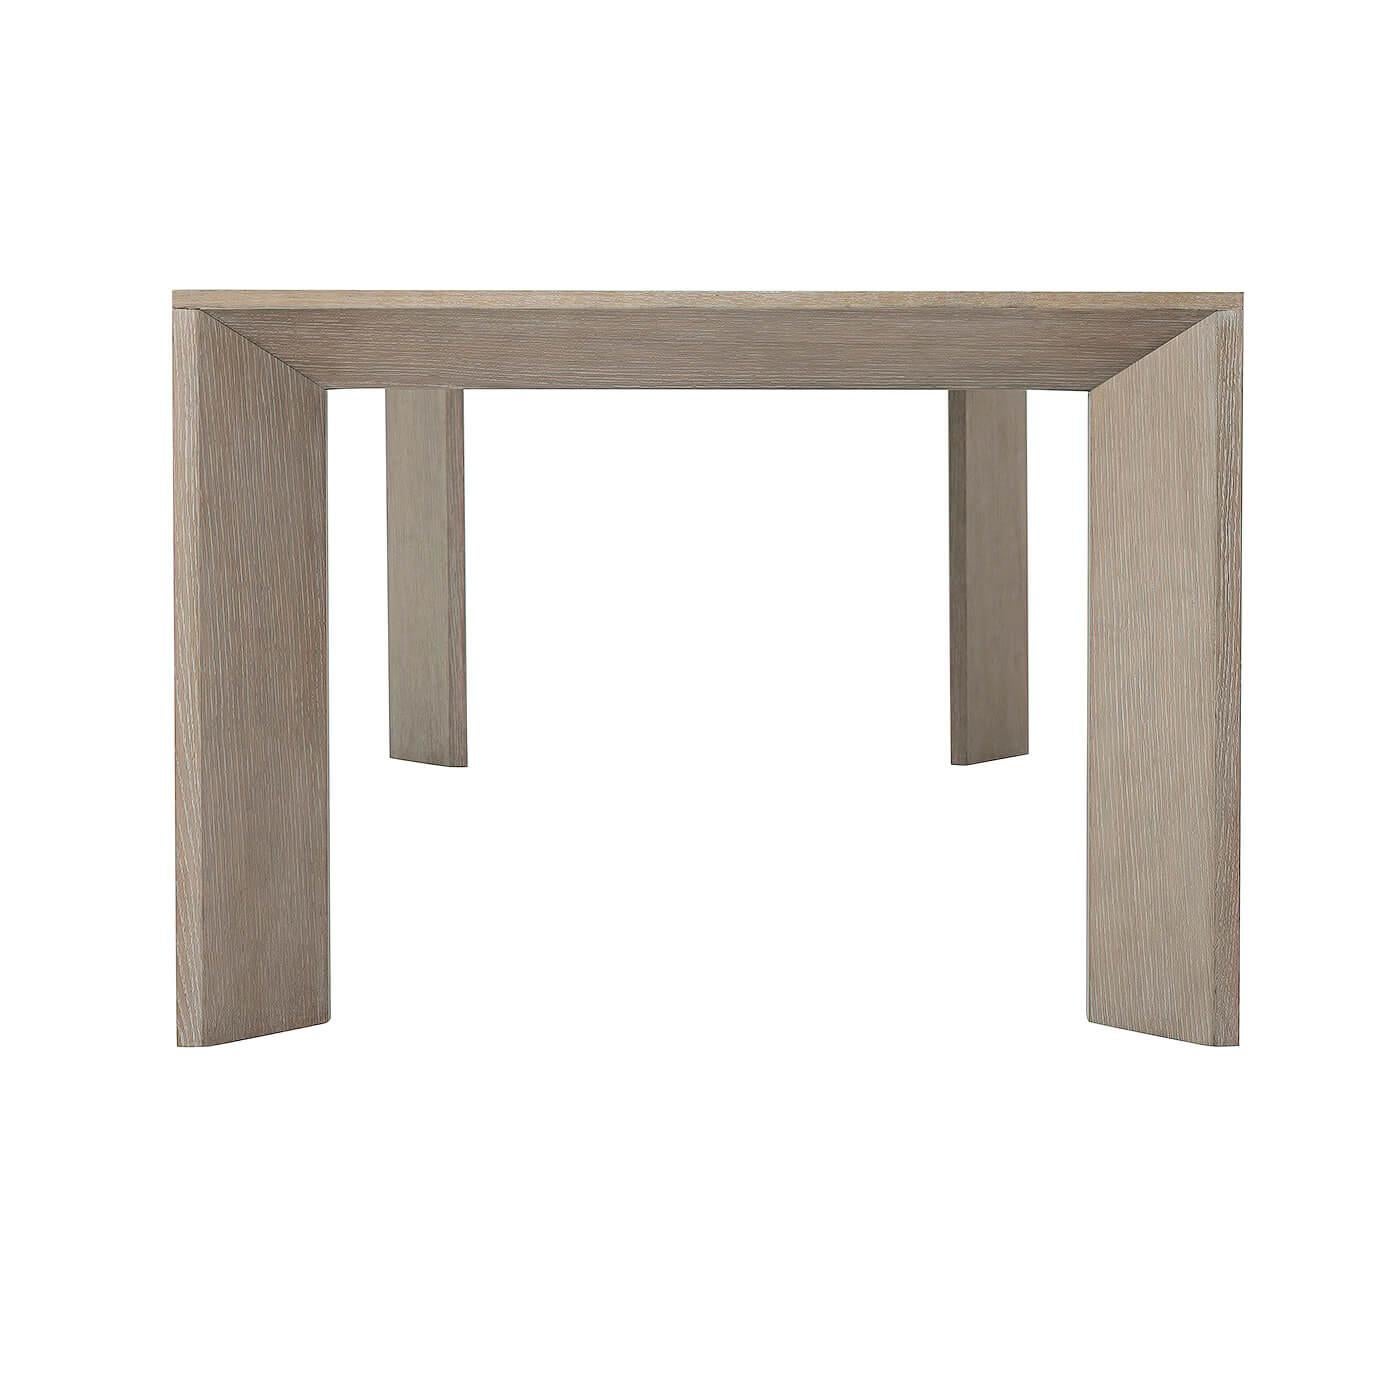 A modern cerused oak dining table to seat 8 or more people. A sleek clean-lined design fitting well within today's modern decor kitchen or dining room. A highly sought-after style with a modern Minimalist look.

Dimensions: 84